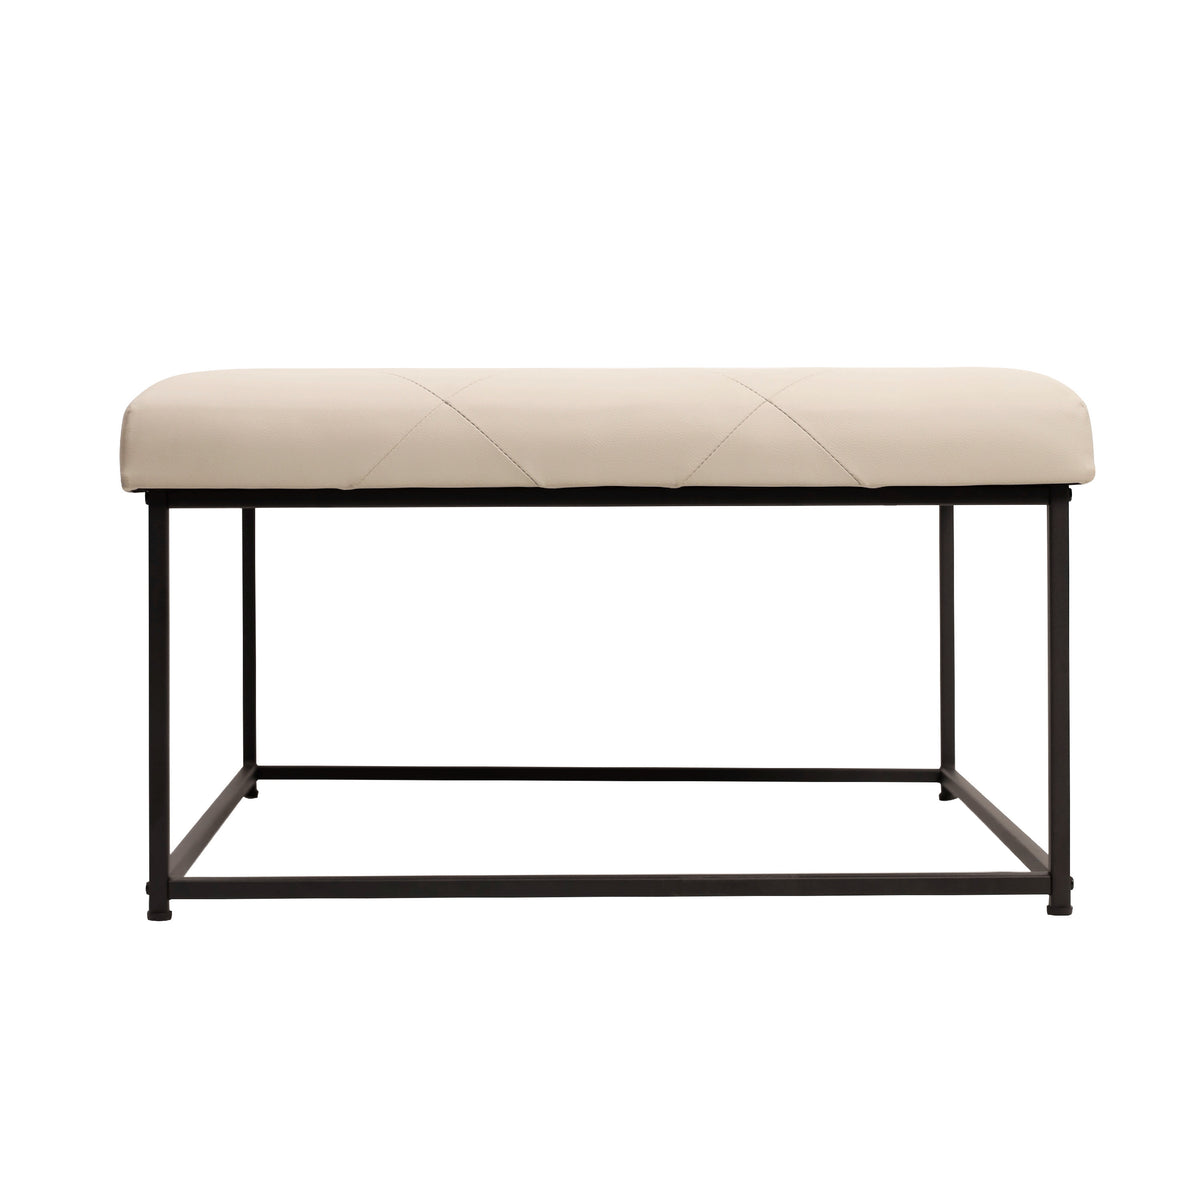 Beige |#| Square LeatherSoft Tufted Ottoman with Black Metal Frame in Beige